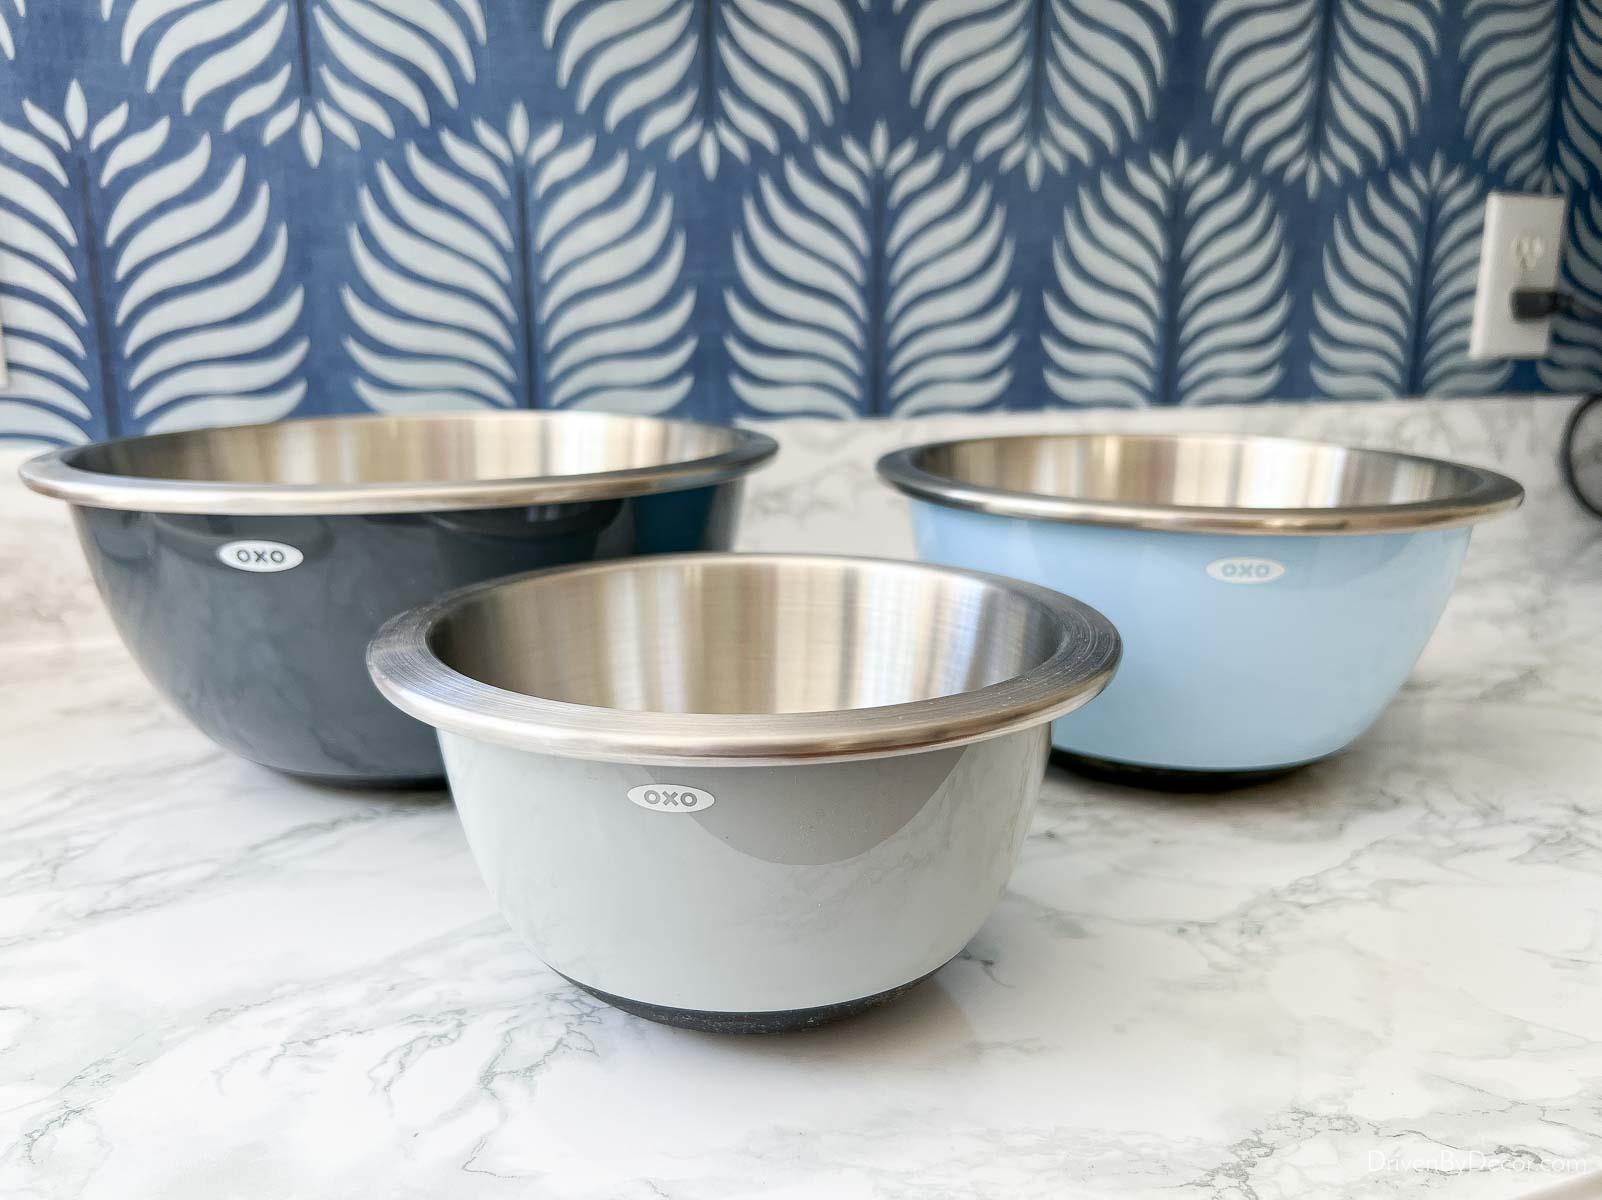 Blue and gray nesting mixing bowls with stay-put bottom